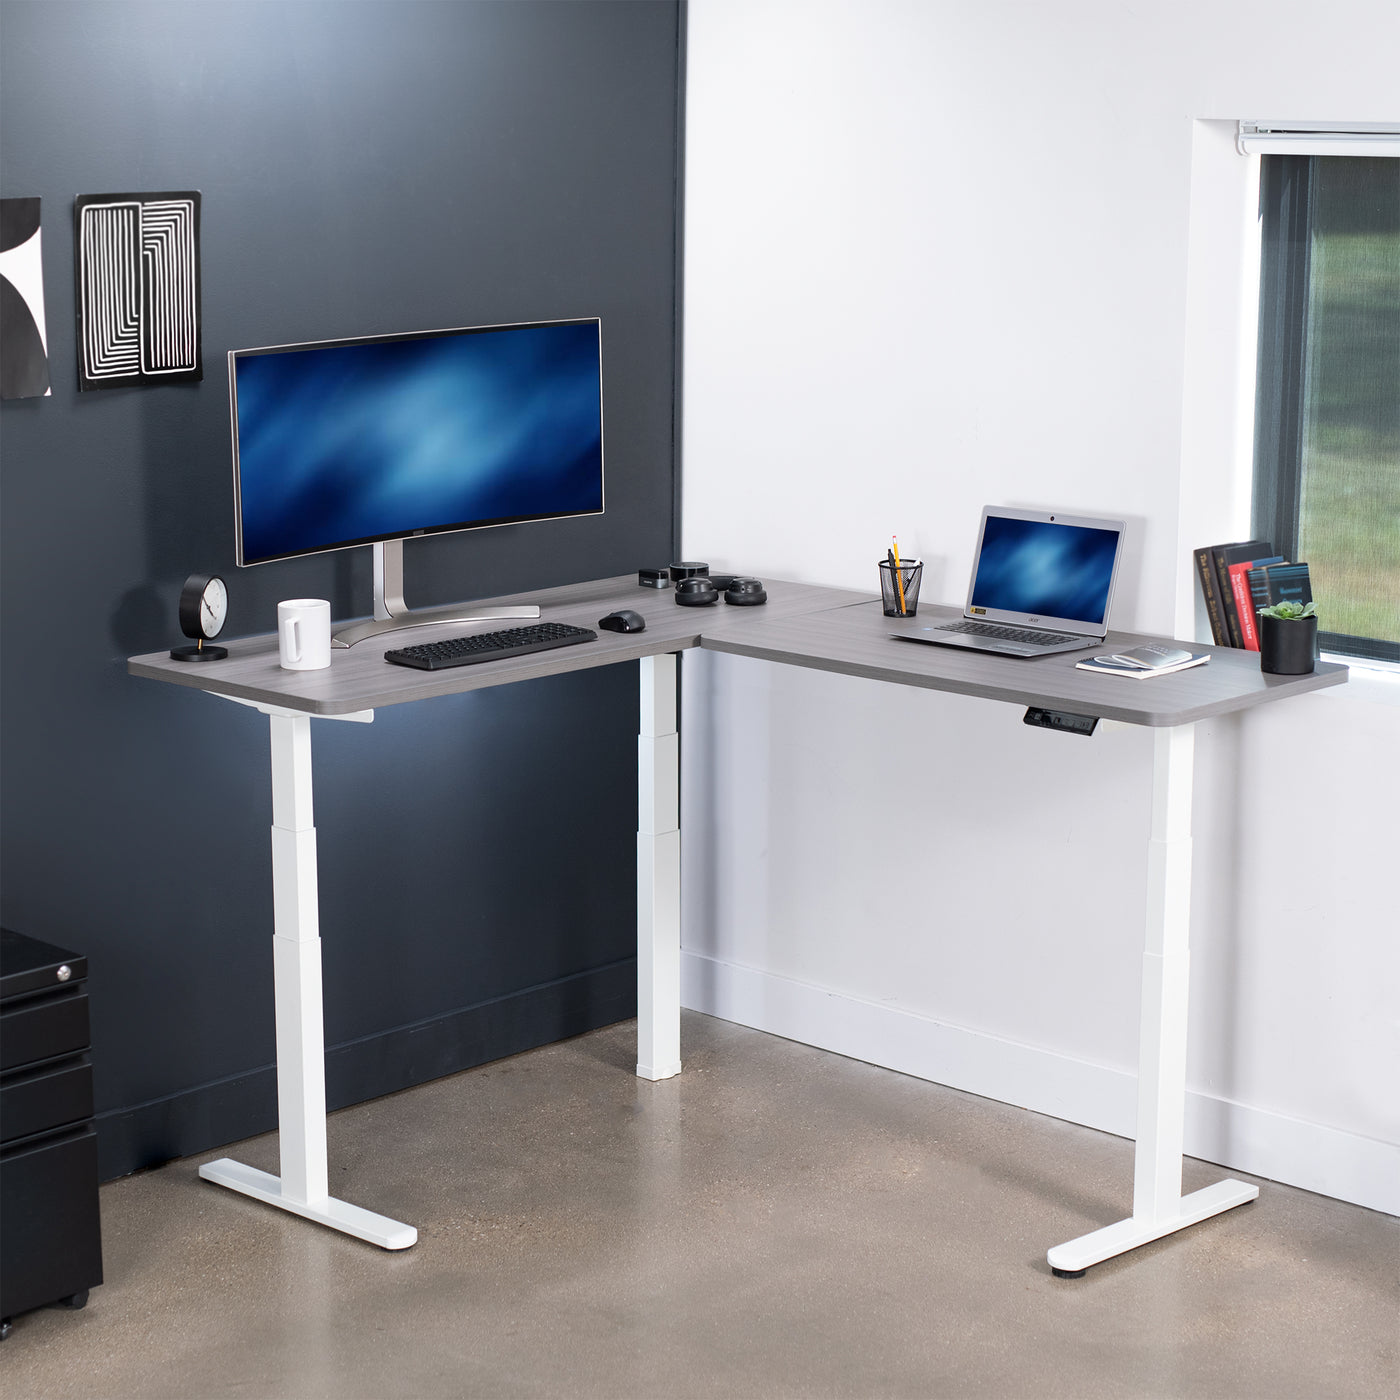 Heavy-duty electric height adjustable corner desk workstation for active sit or stand efficient workspace.